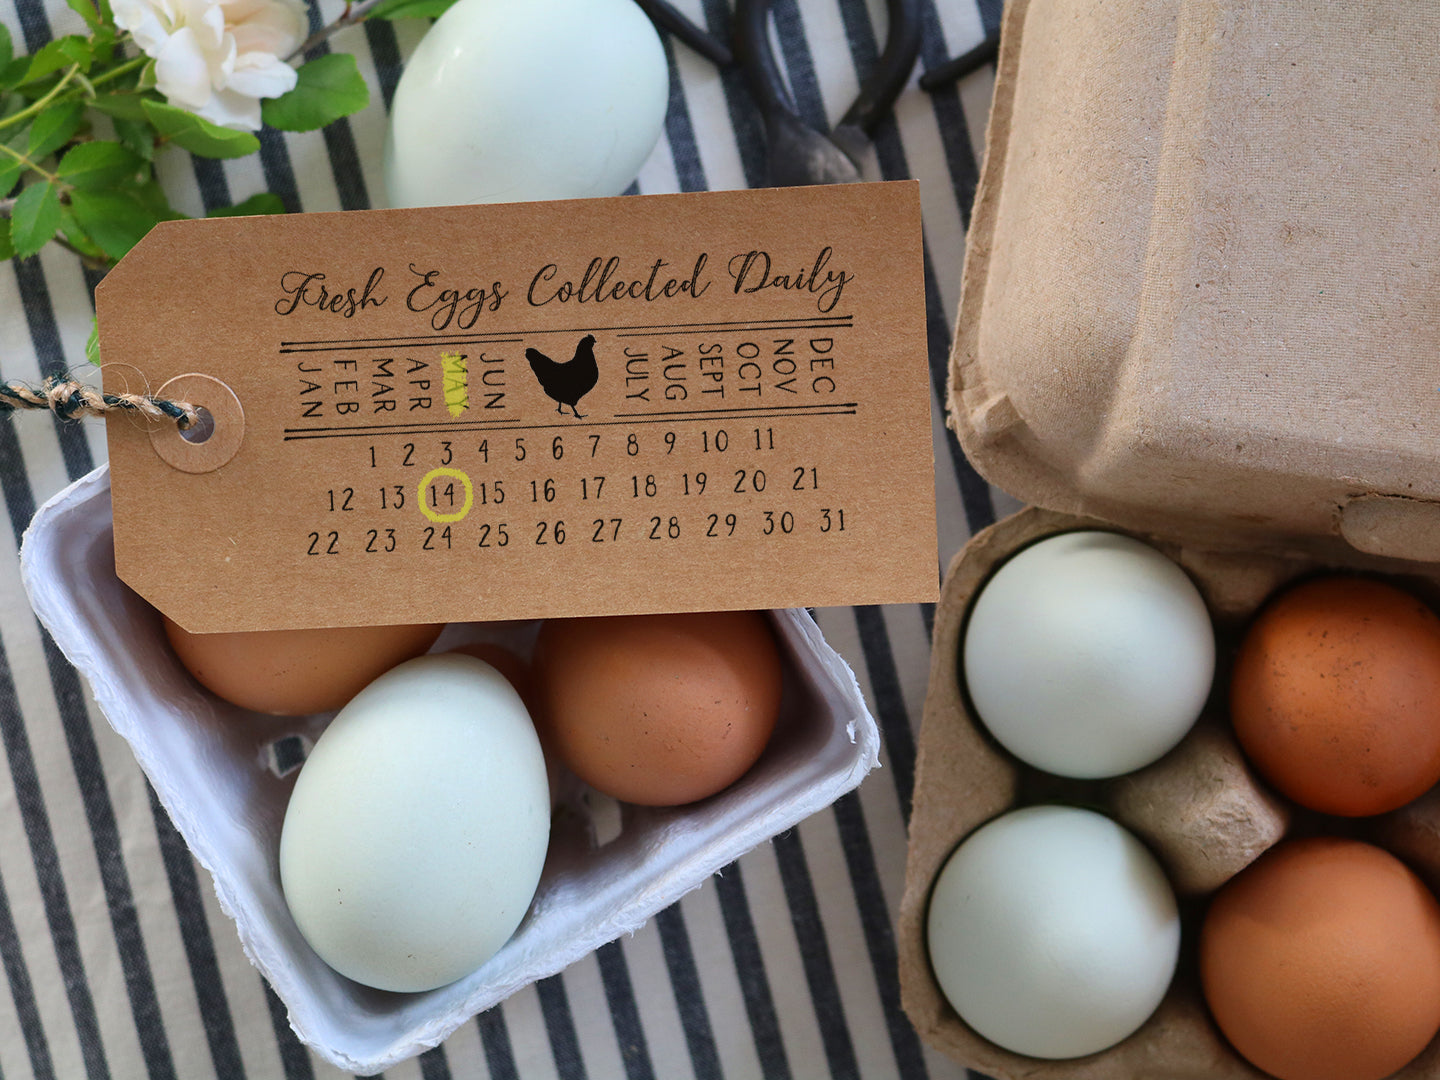 Egg Stamp, 4 Pcs, Egg Stamps for Fresh Eggs, Egg Stamper, 4 Unique Designs  with Ink Pad Included, Egg Stamps for Fresh Eggs Personalized, Chicken Egg